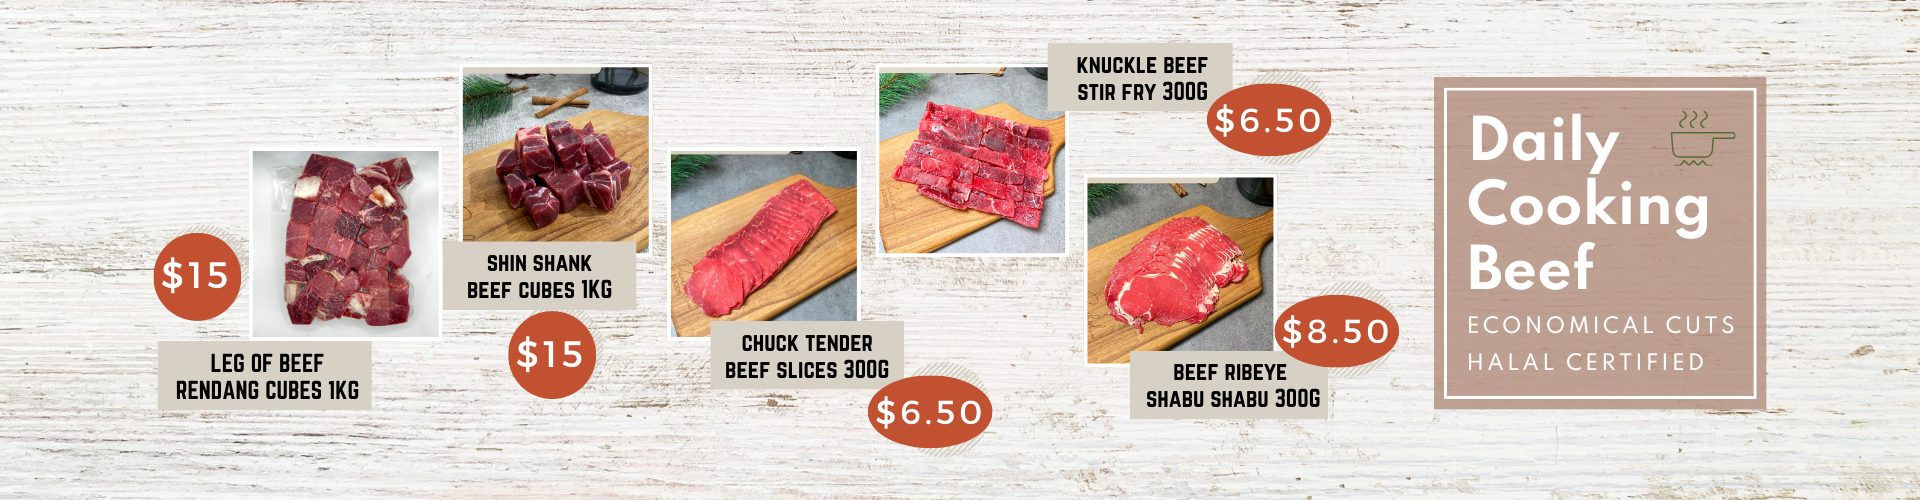 Website Banner - Daily Cooking Halal Beef